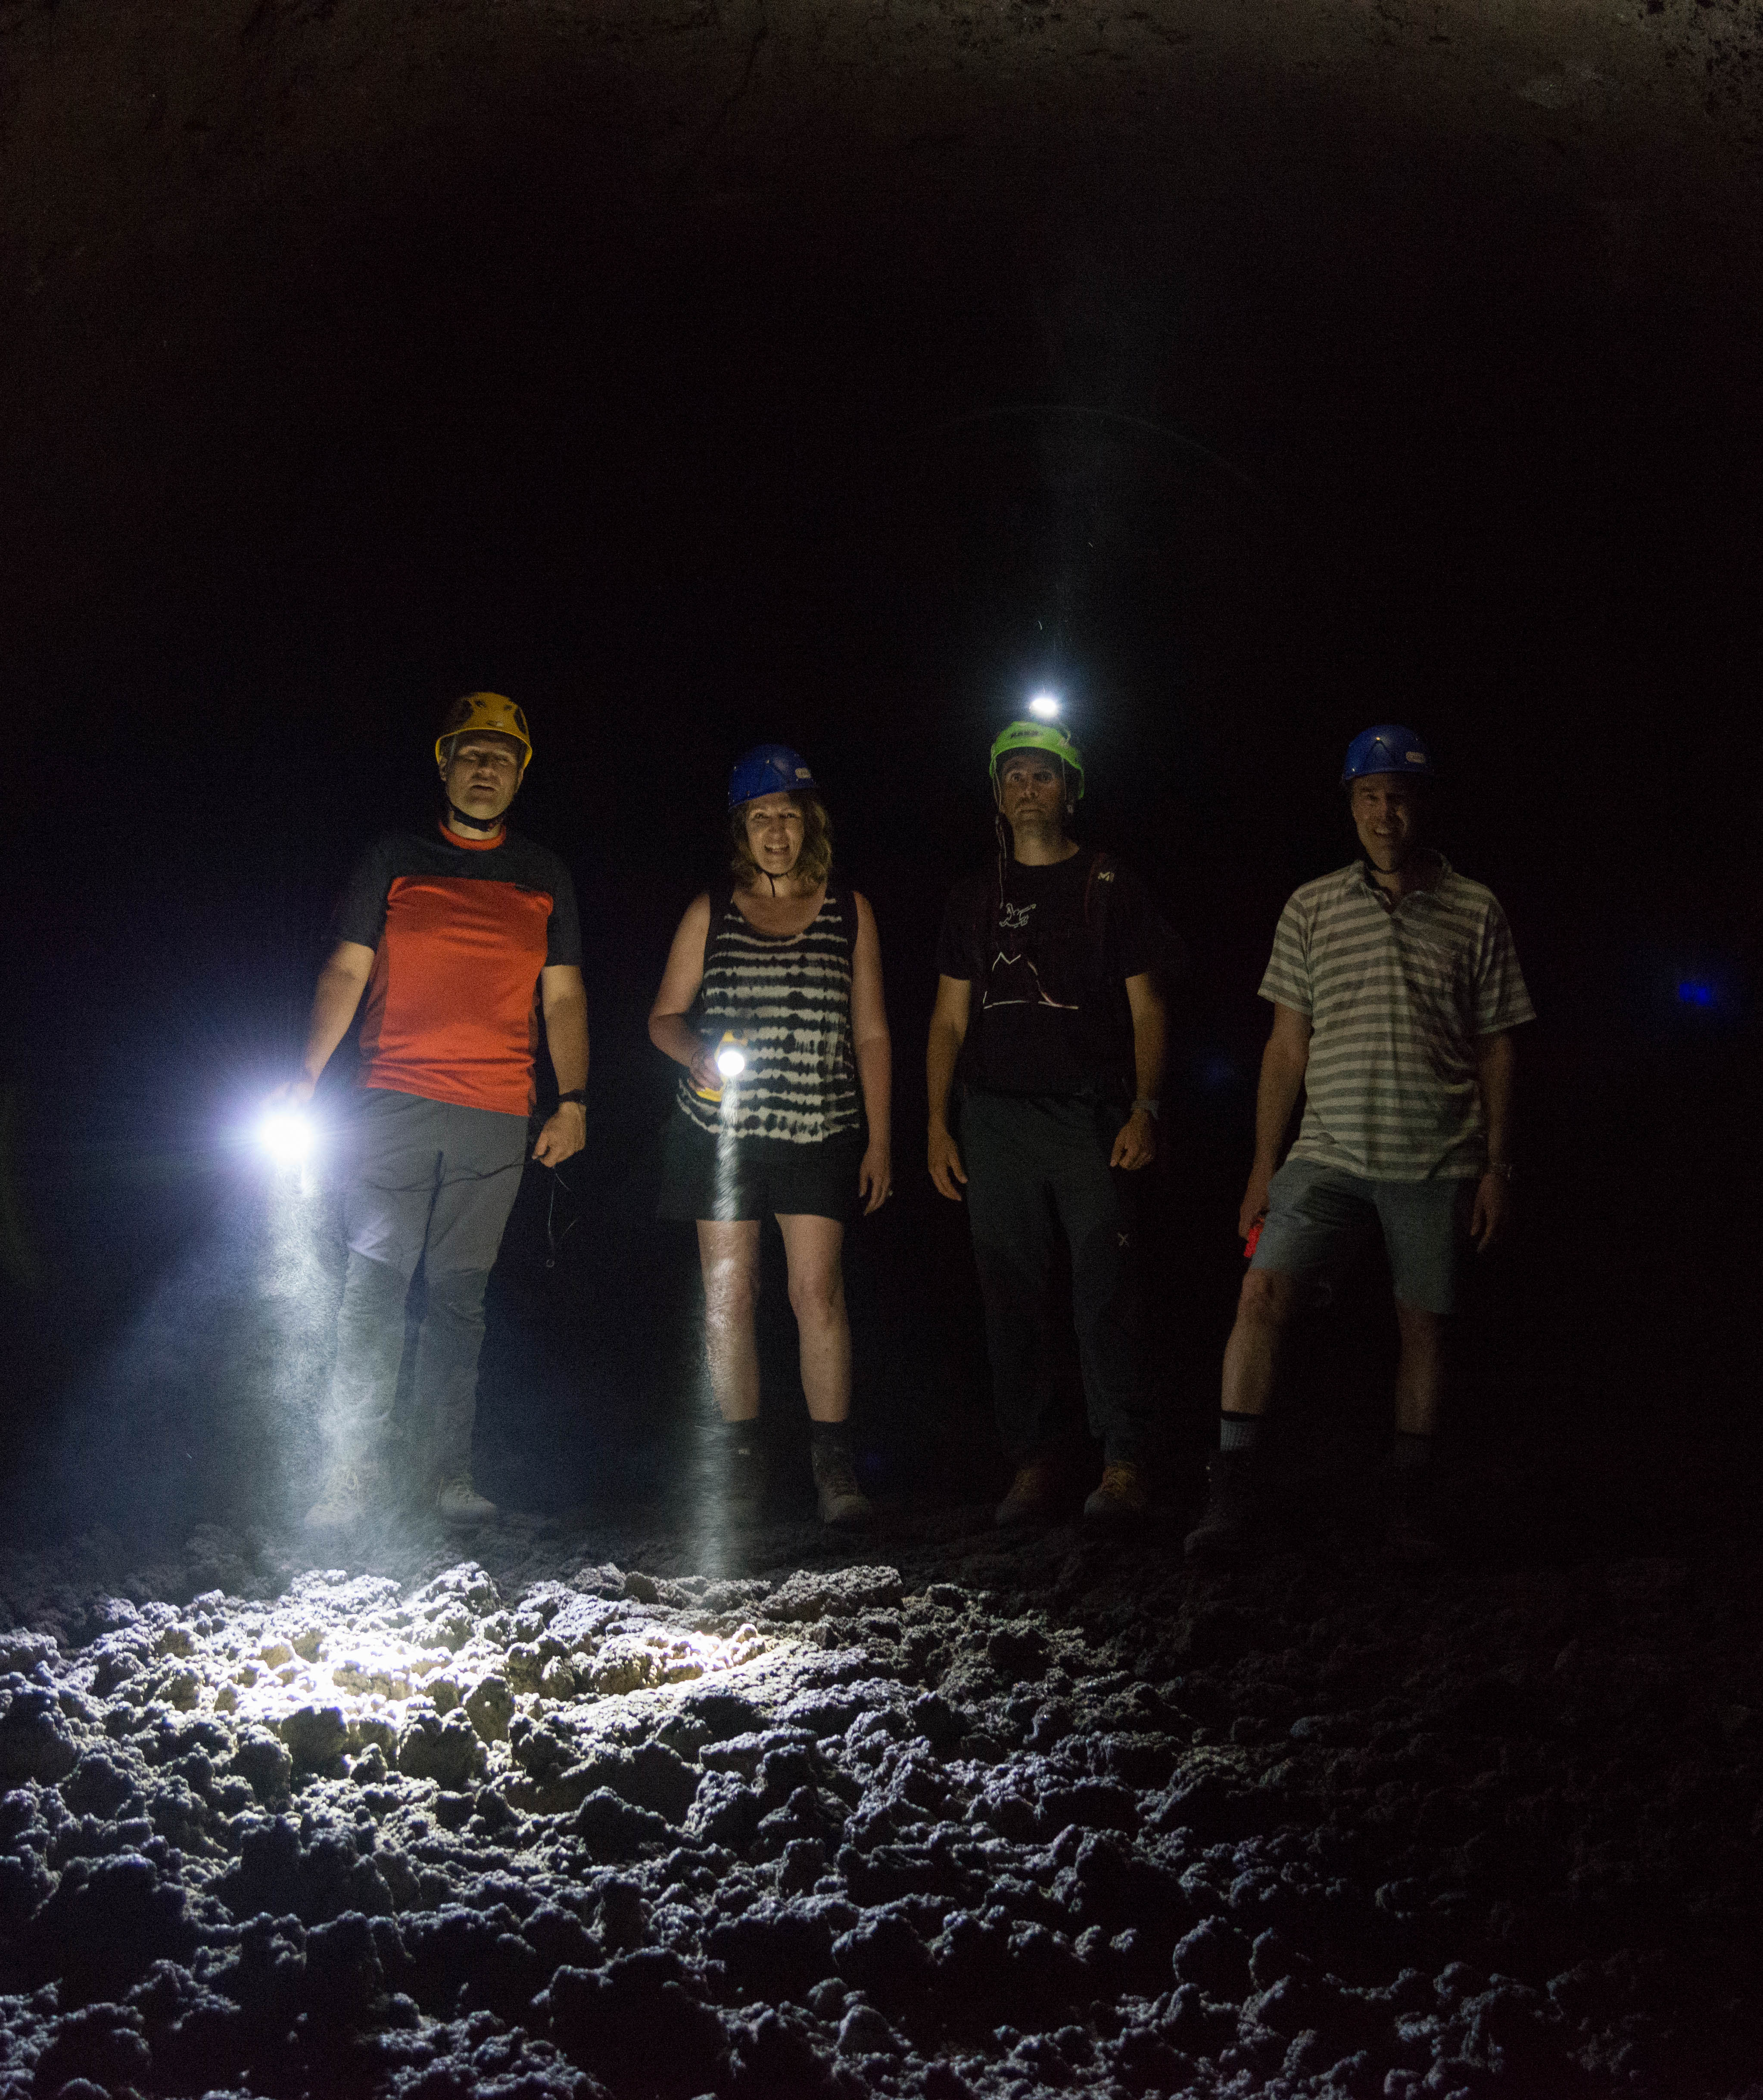 The final stop - exploring a lava tube created 260 years ago.